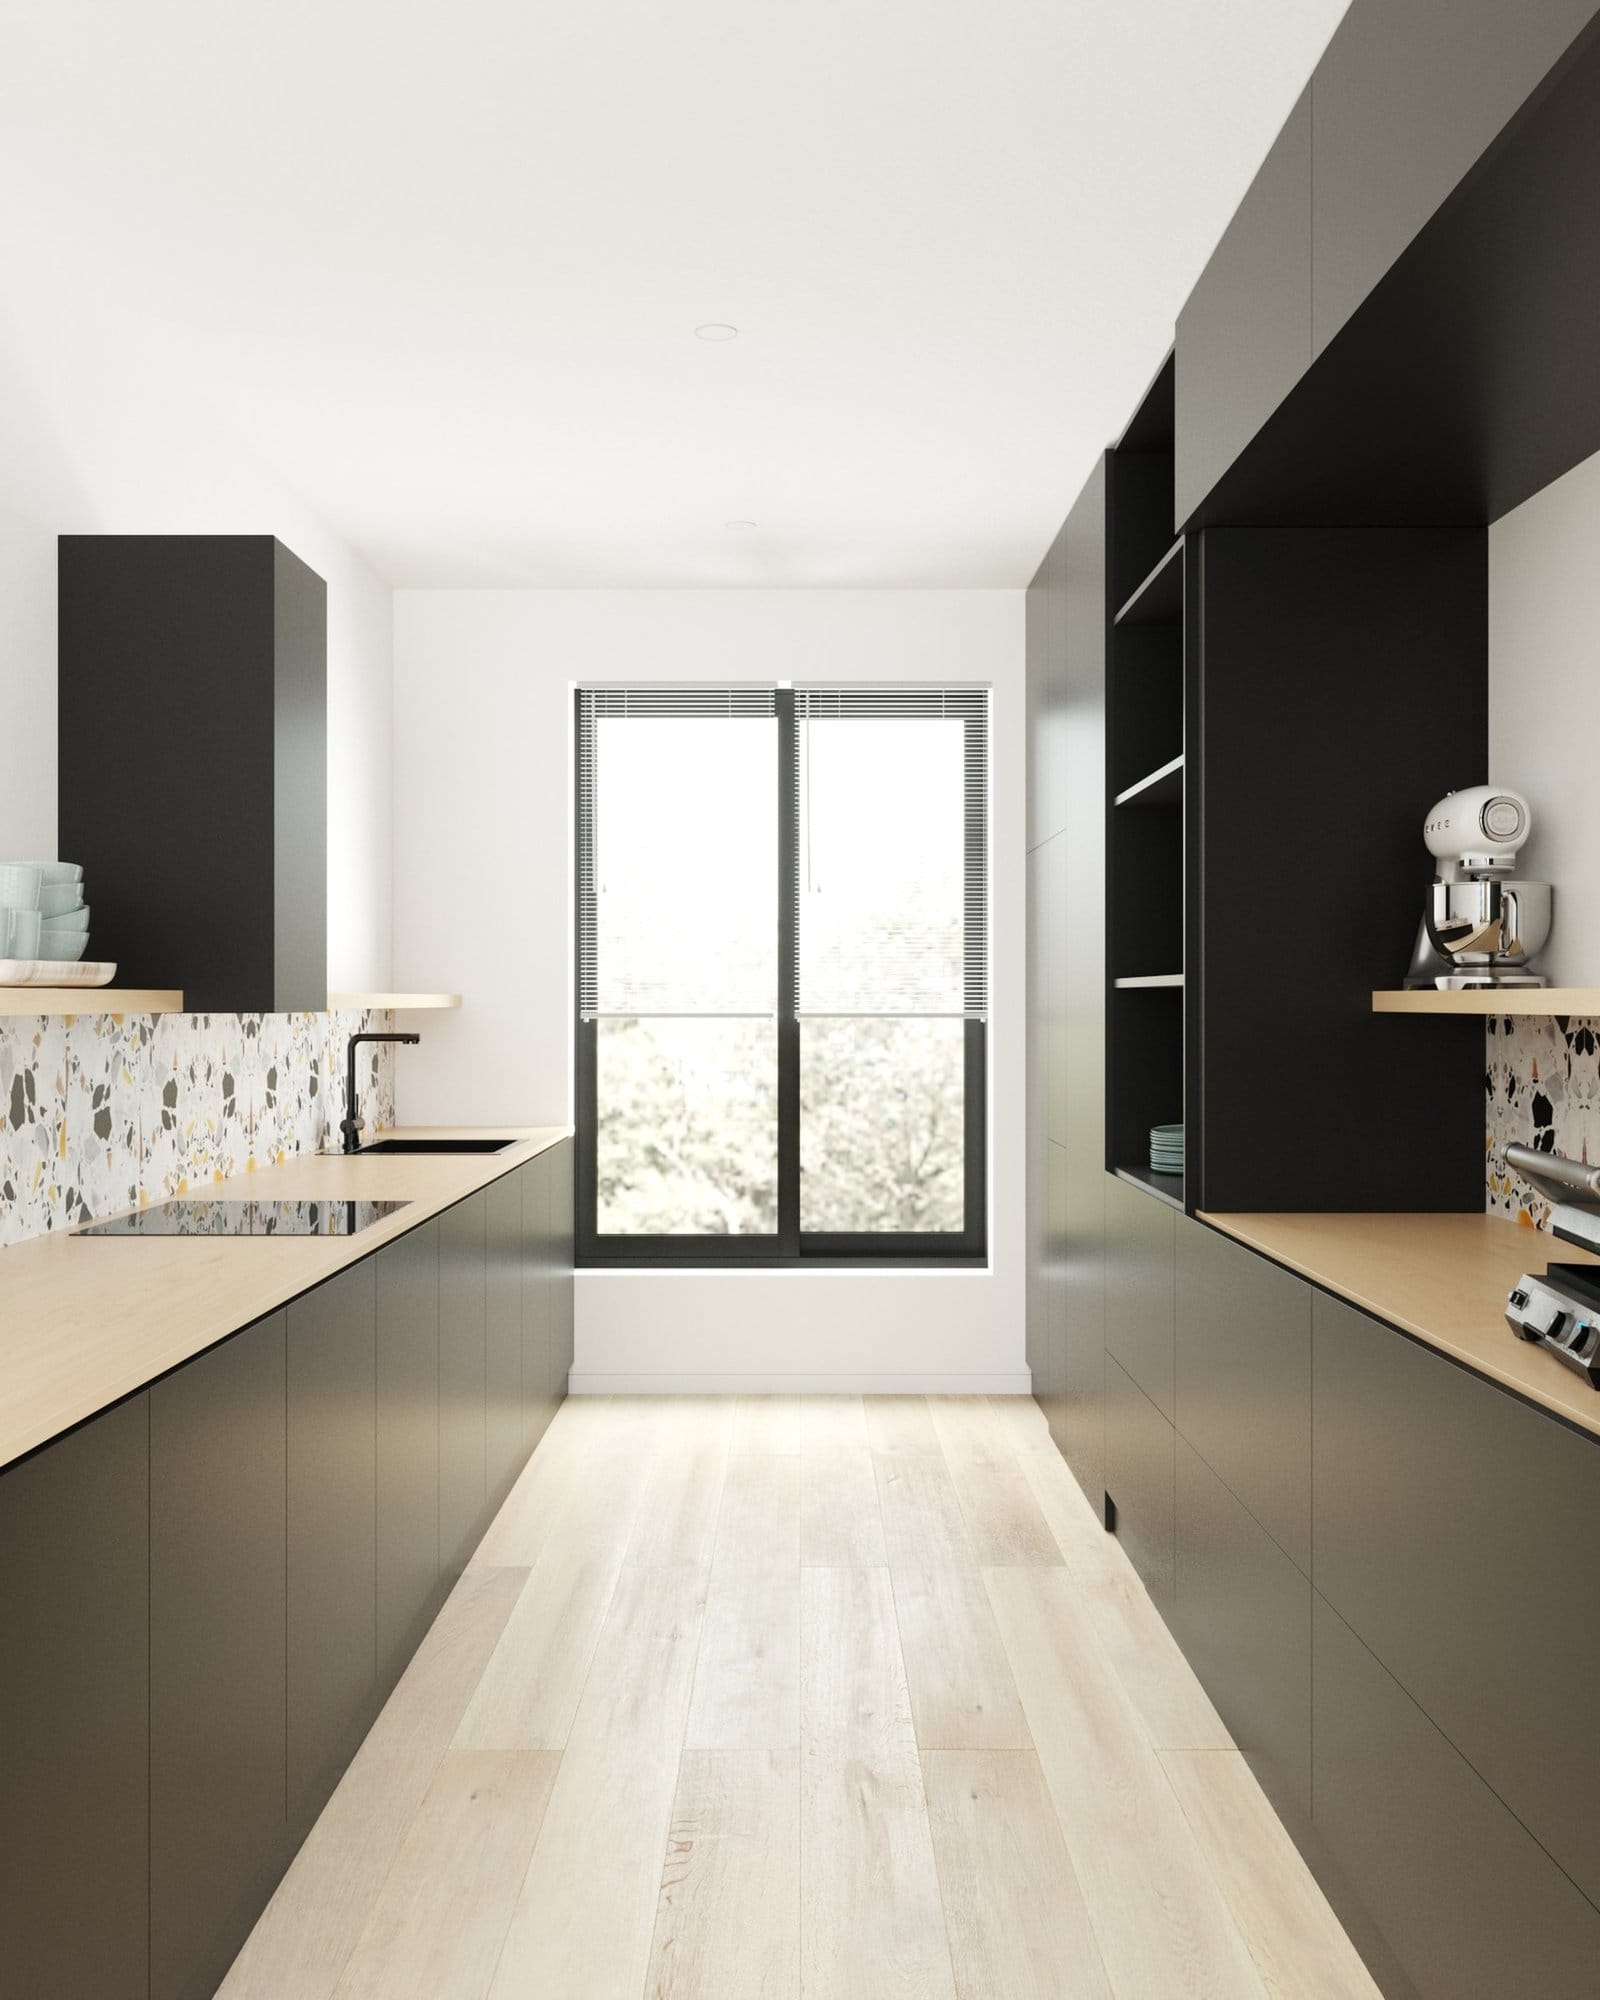 6. Dark Cabinets with White Washed Oak